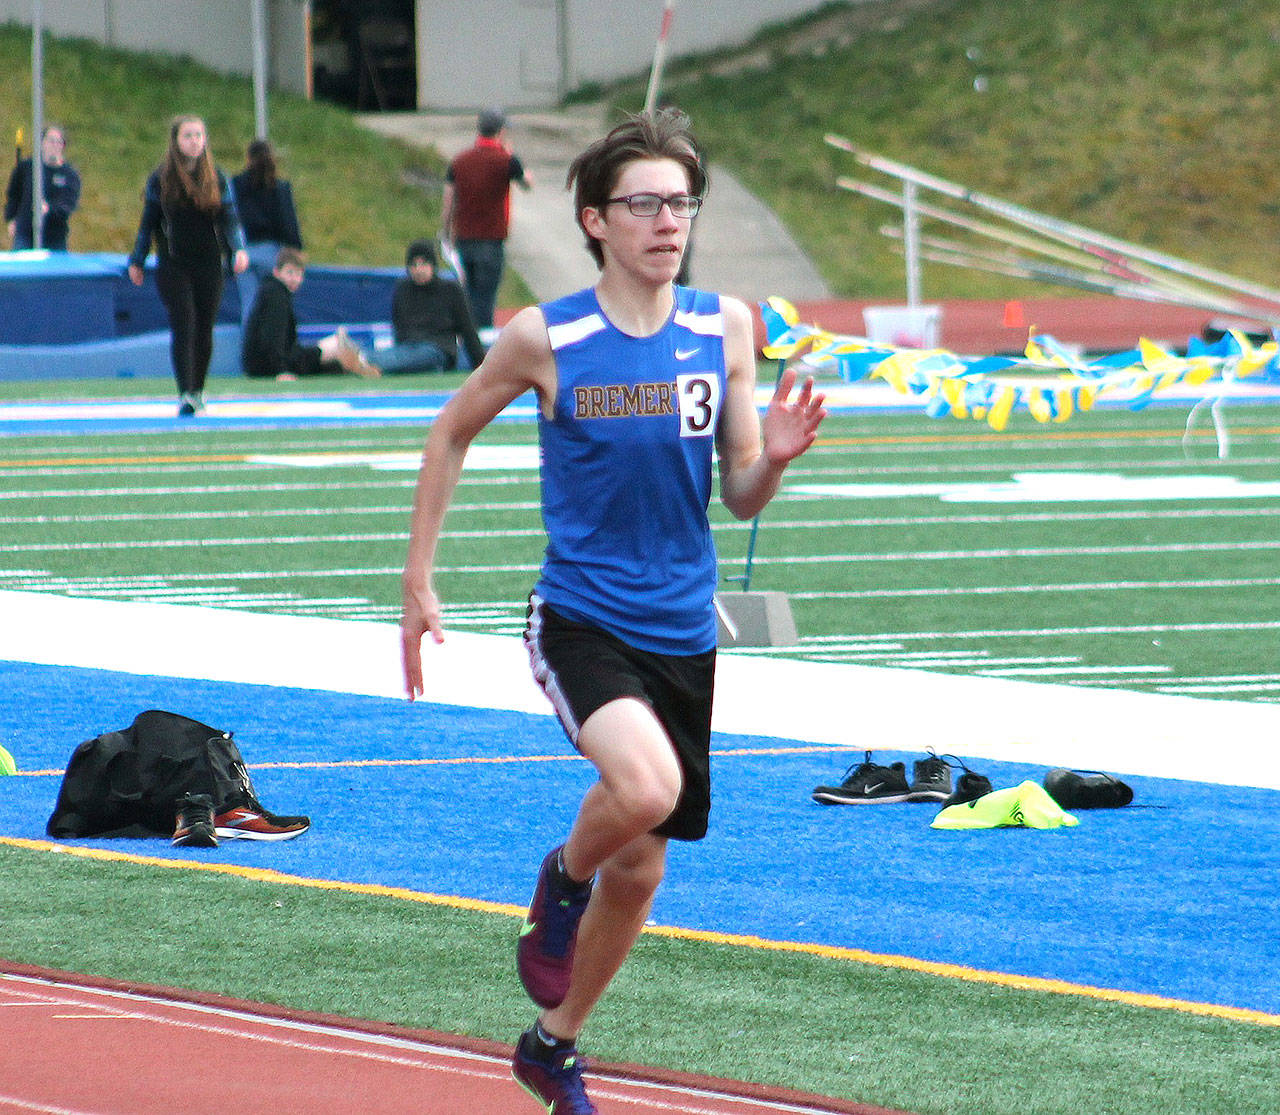 Bremerton’s Enrique Brambila finishes the 800-meter run with a second place time of 2:09.93. (Mark Krulish/Kitsap News Group)